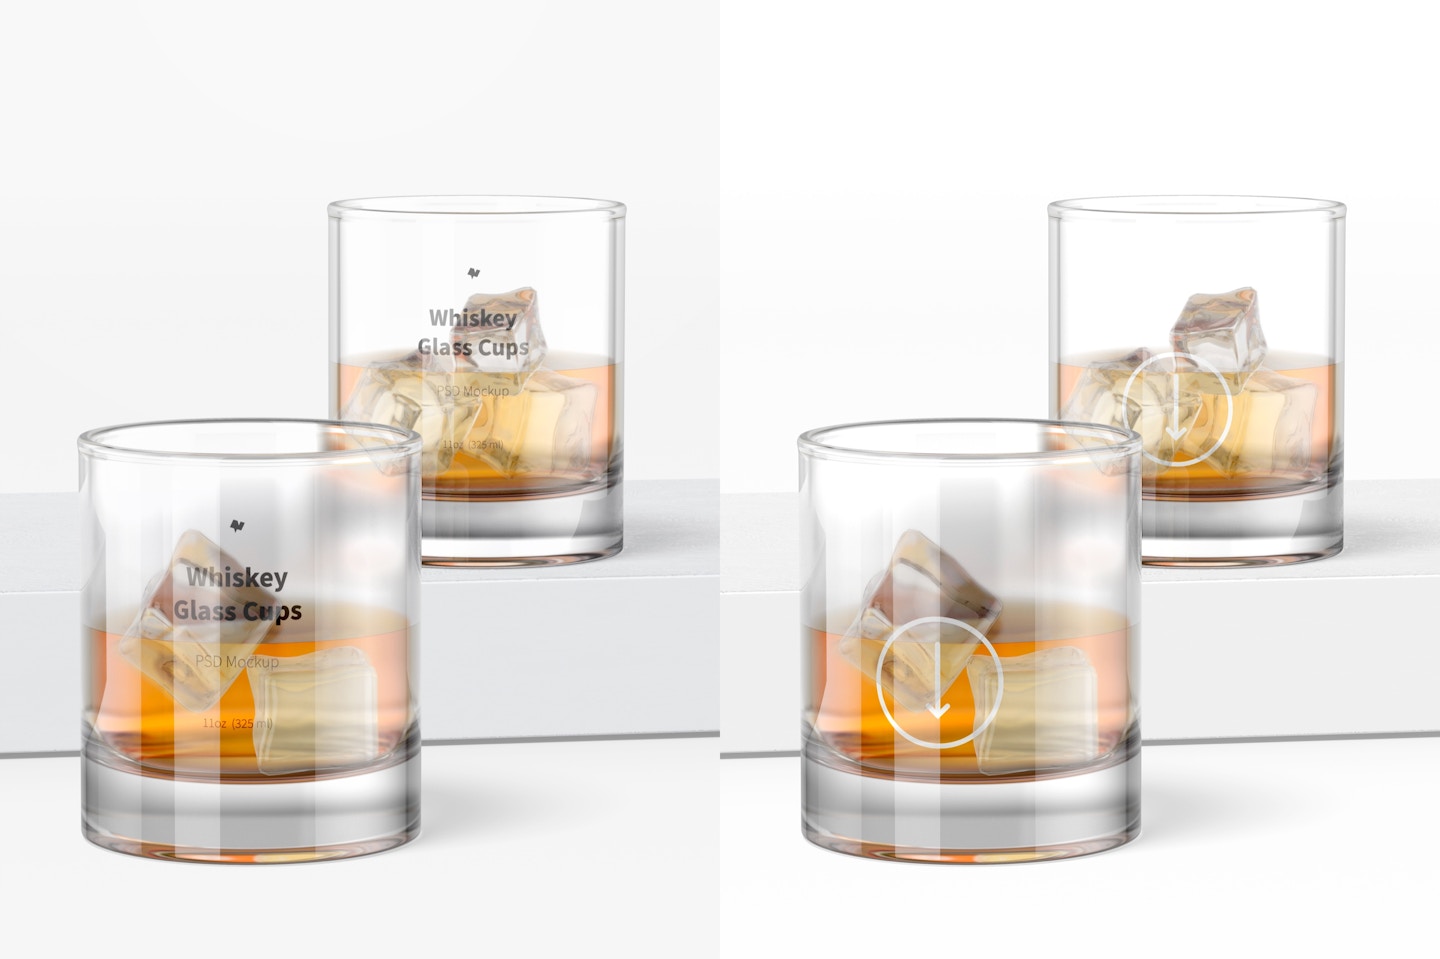 11 oz Whiskey Glass Cups Mockup, Perspective